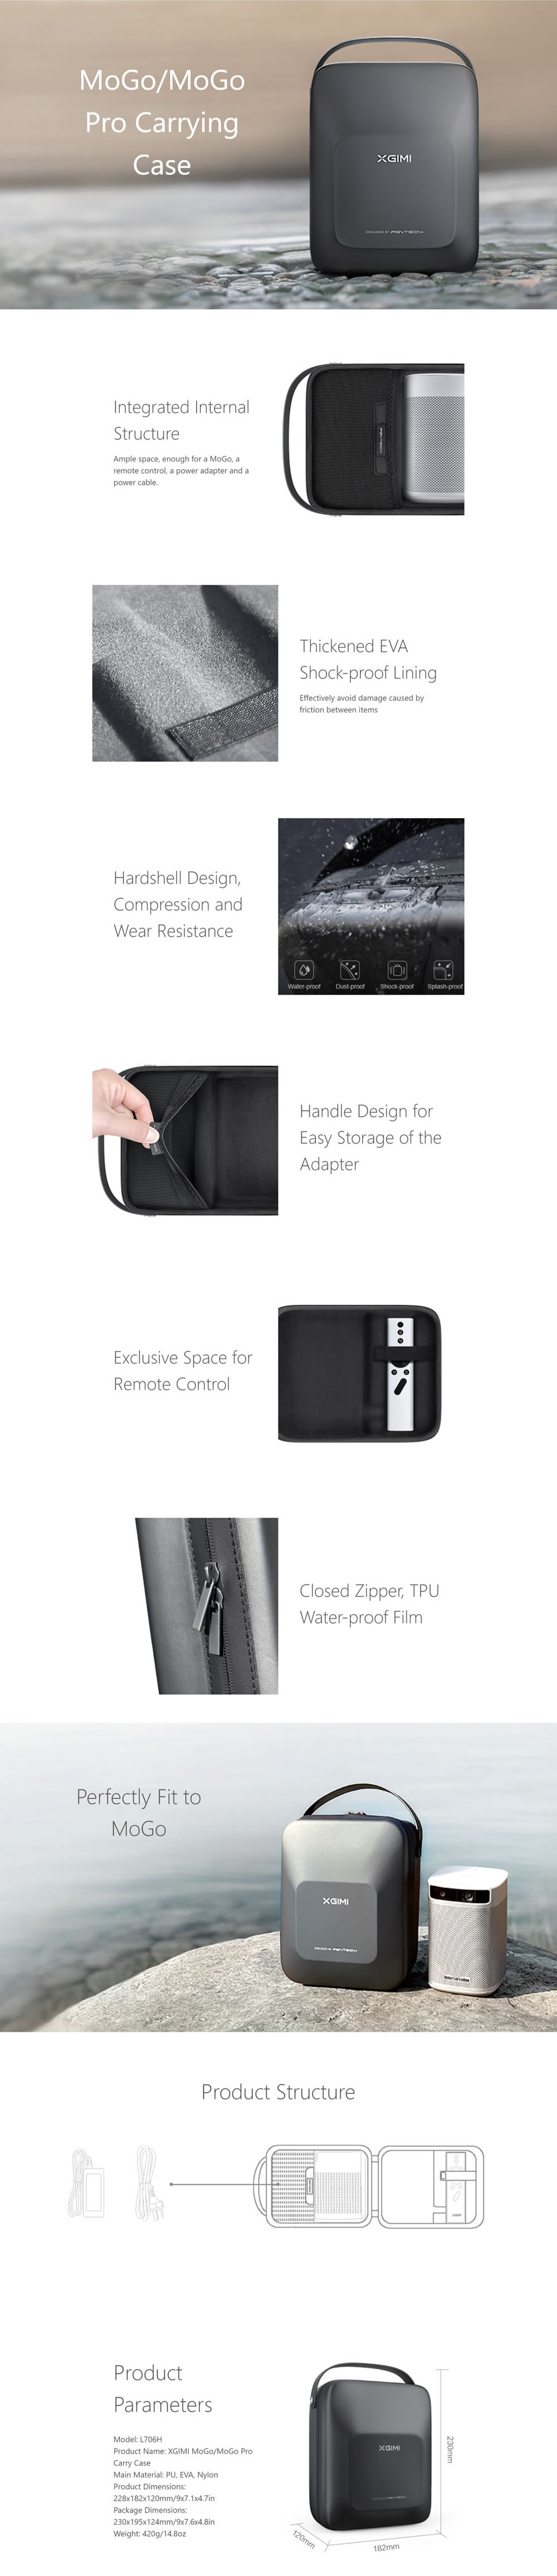 Xgimi Carry Case Specifications